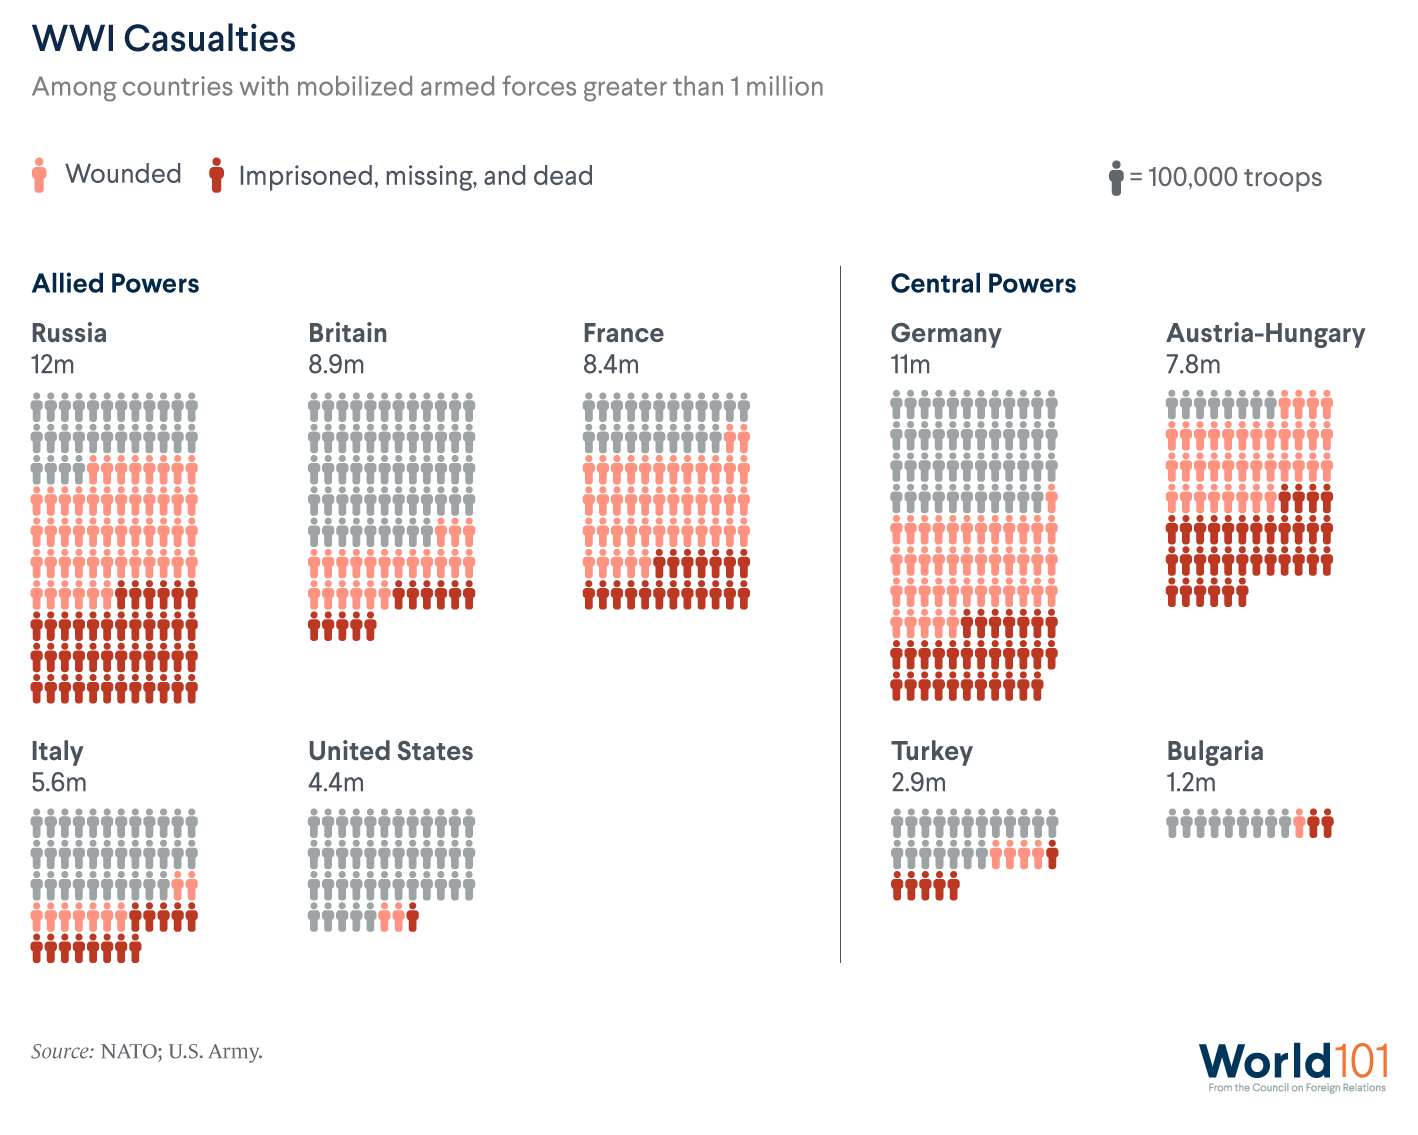 An infographic showing the World War I casualties (wounded, imprisoned, missing, or dead) among countries with mobilized armed forces greater than 1 million. Sources: NATO; U.S. Army. For more info contact us at world101@cfr.org.